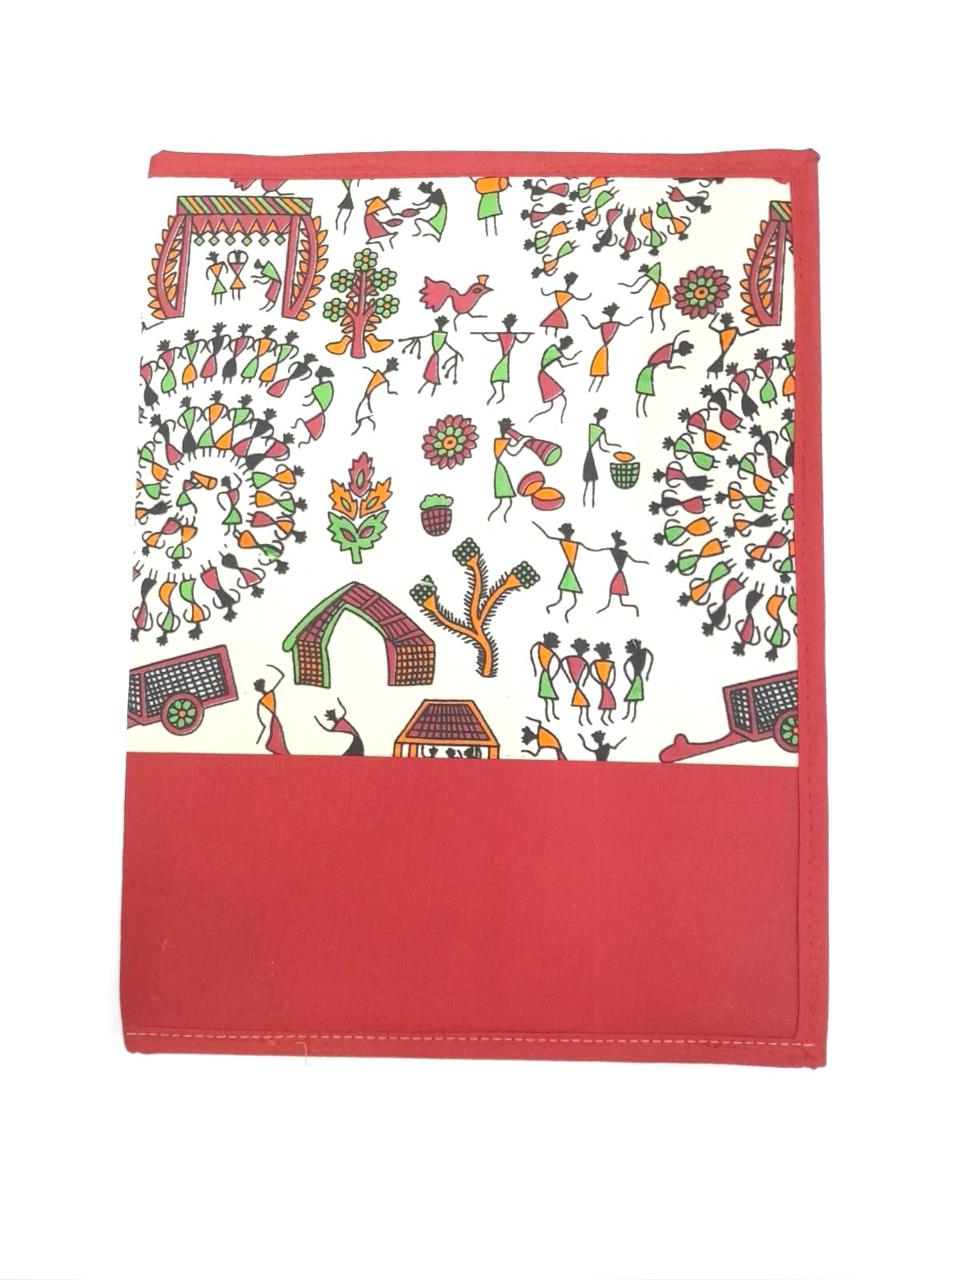 Warli Design Printed Files & Folders To Store Important Documents By Tamrapatra